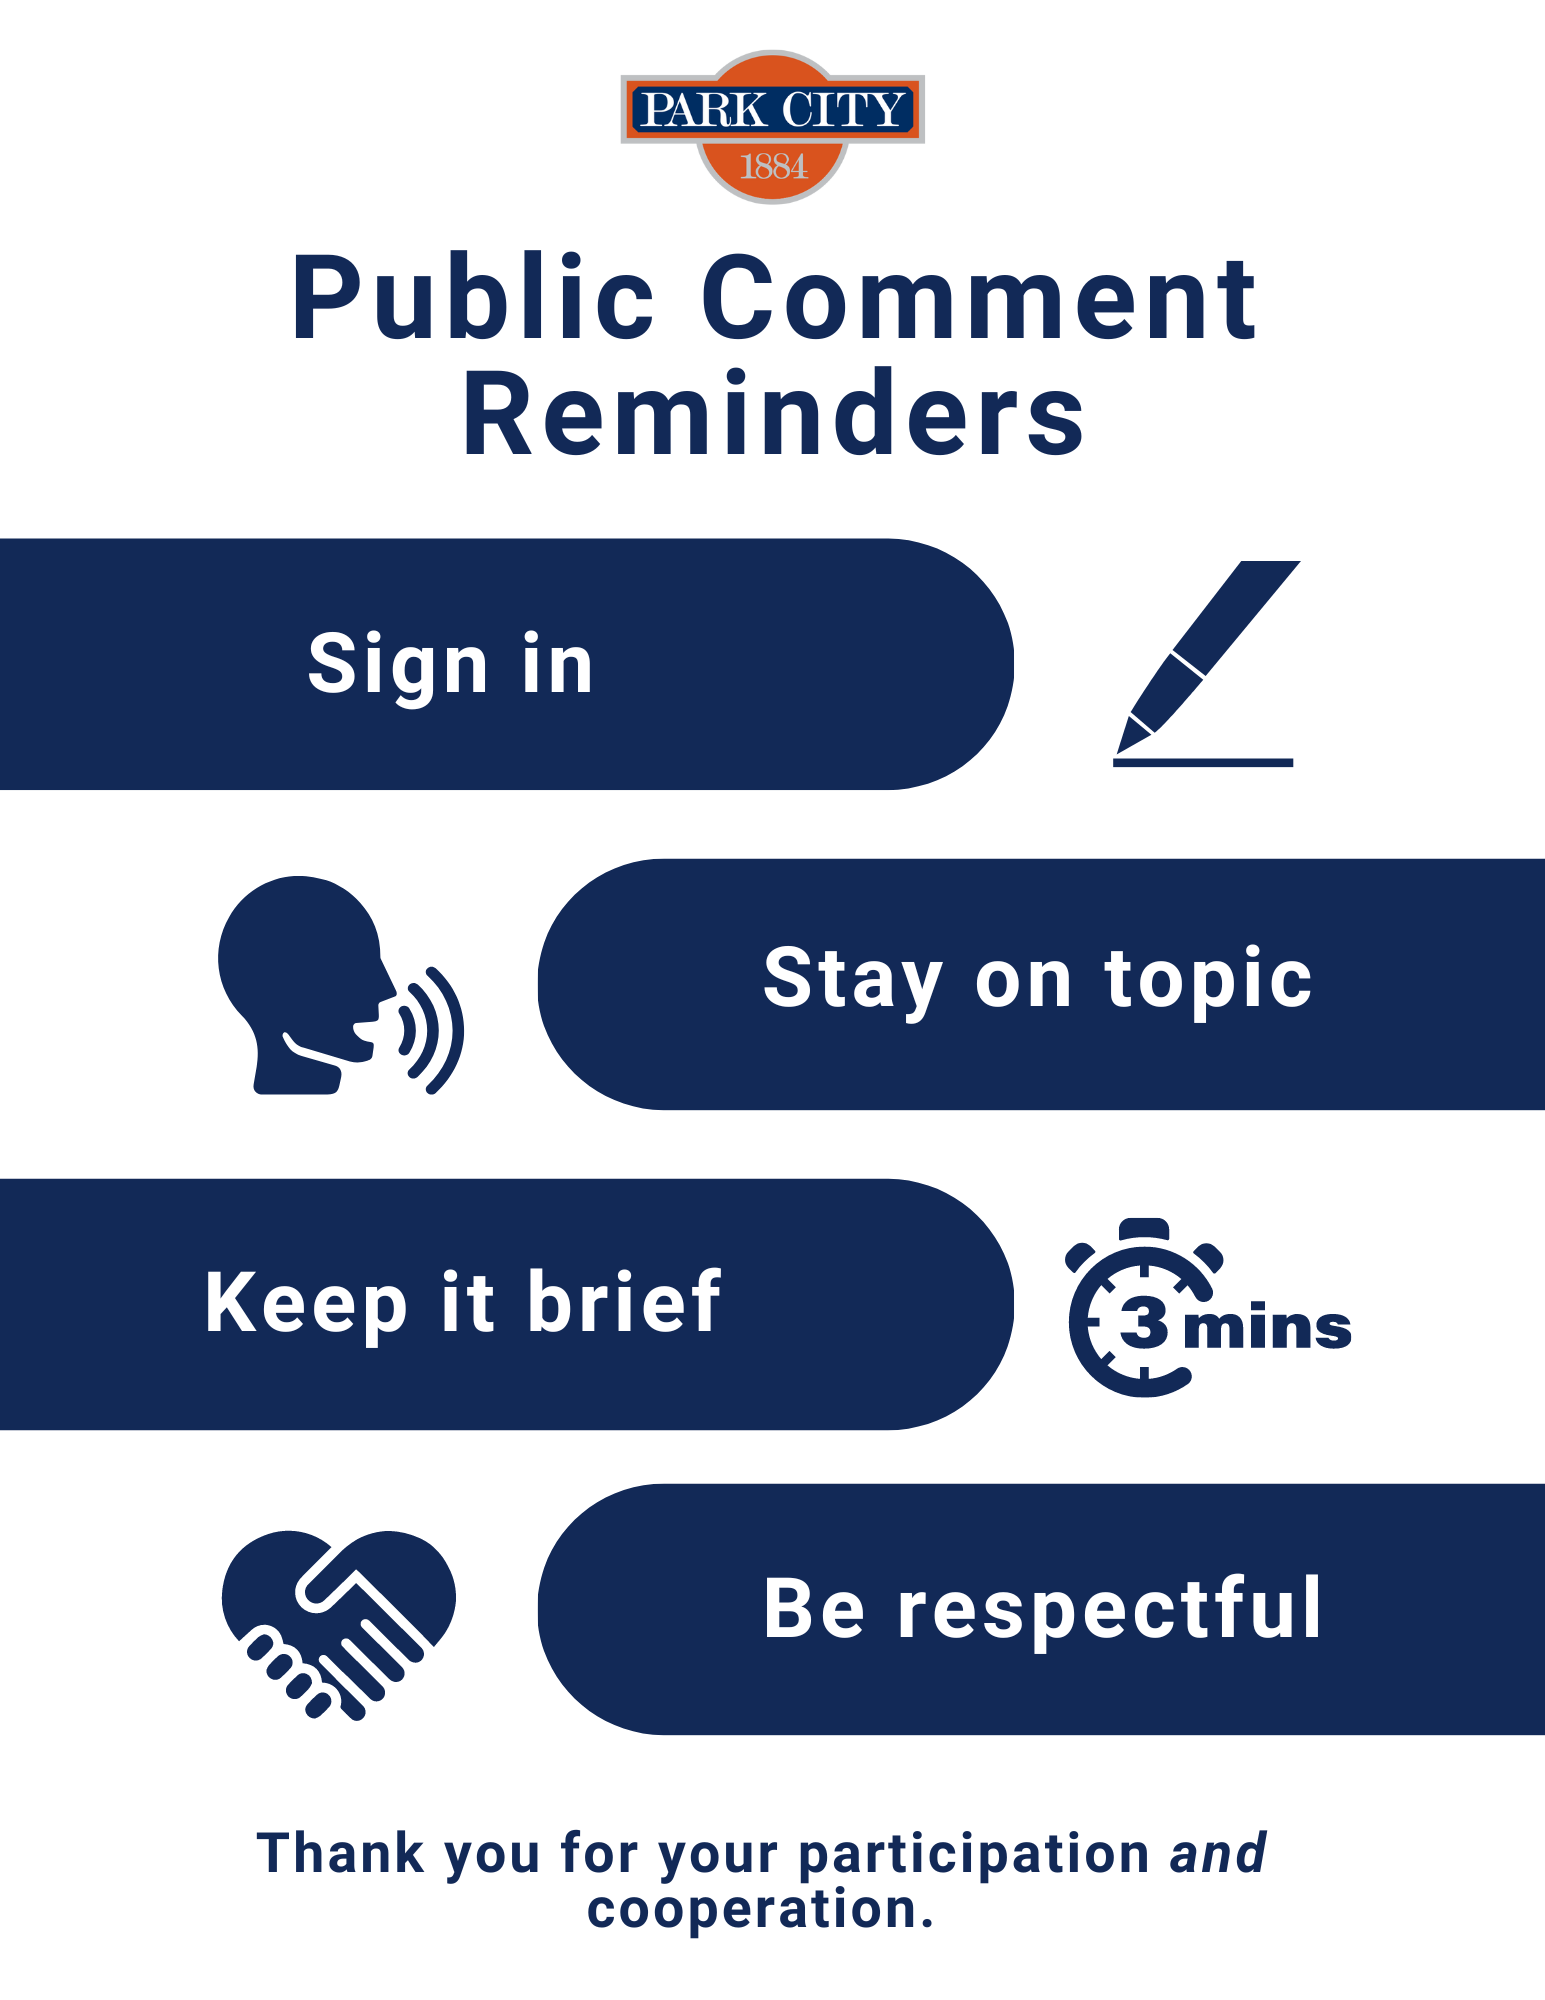 Public Meeting Guidelines